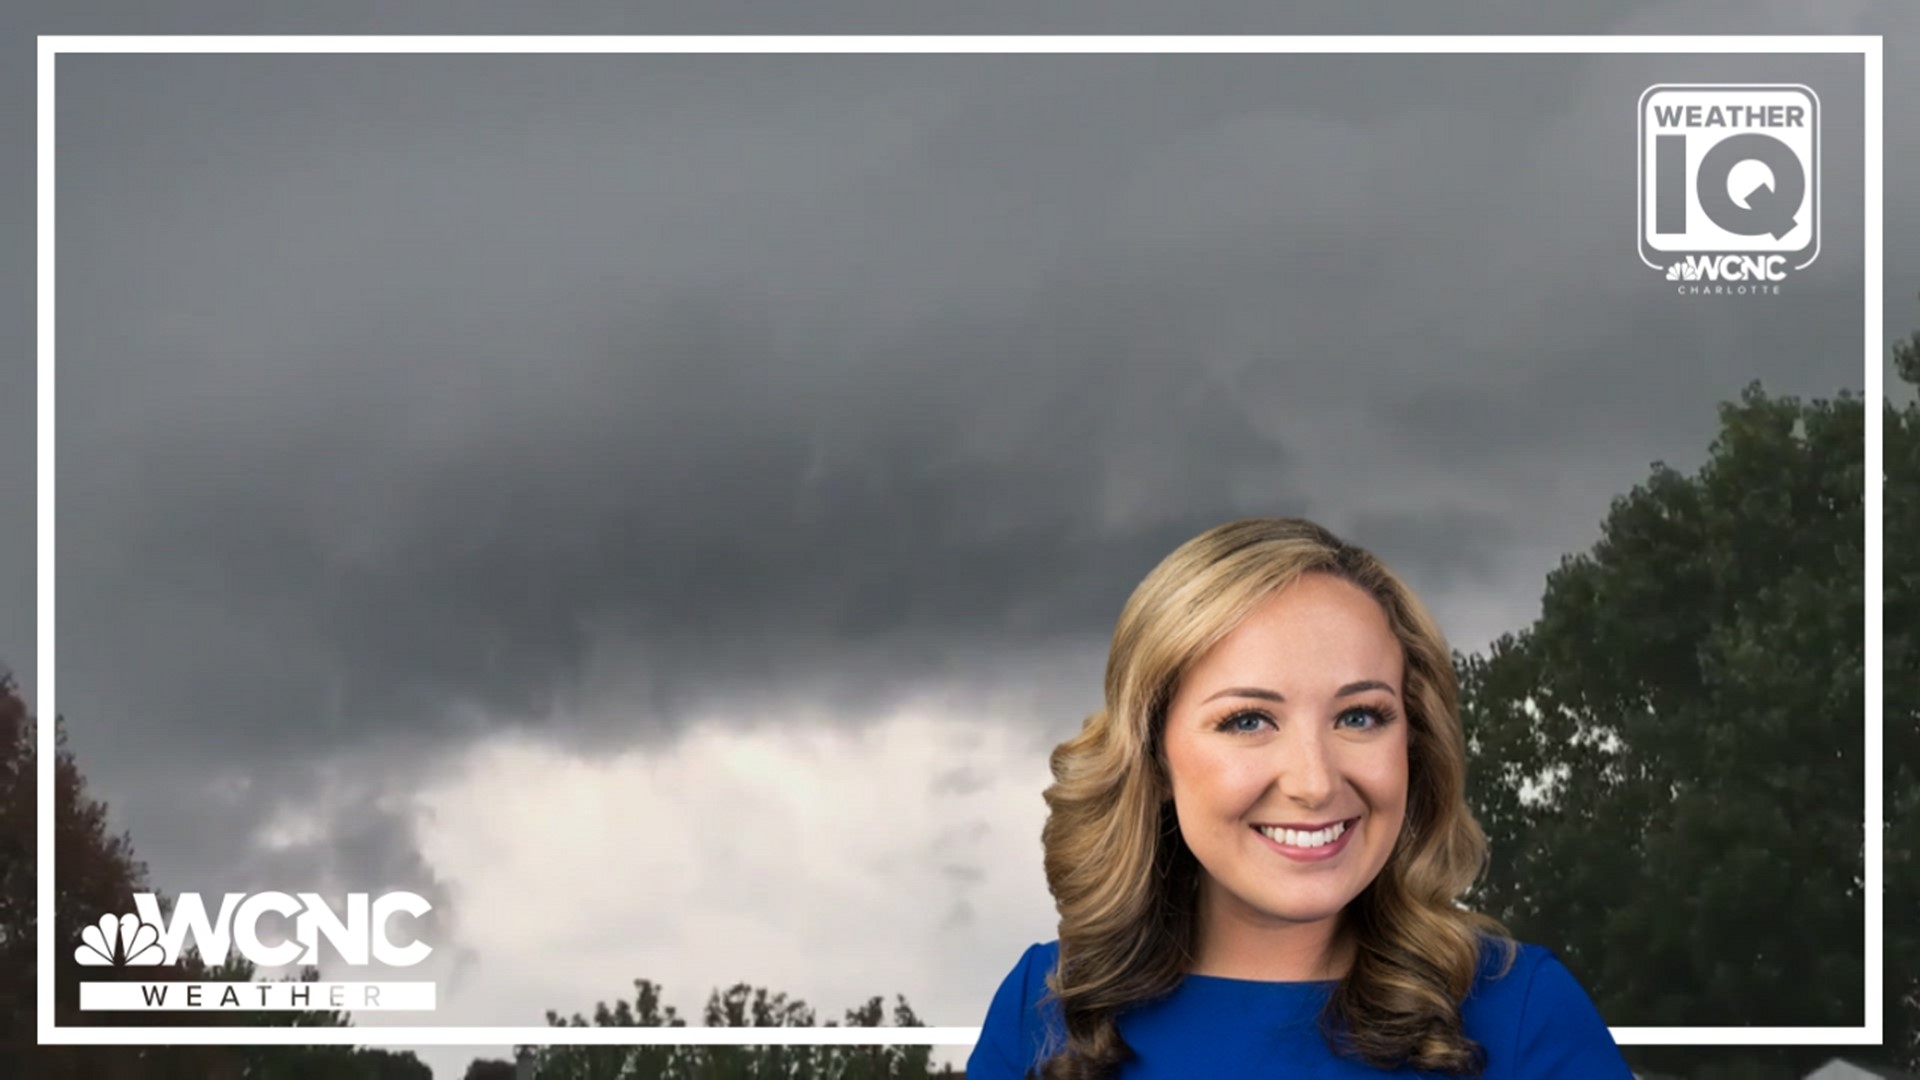 WCNC Charlotte is breaking down important weather terms to know to help keep you and your family safe.